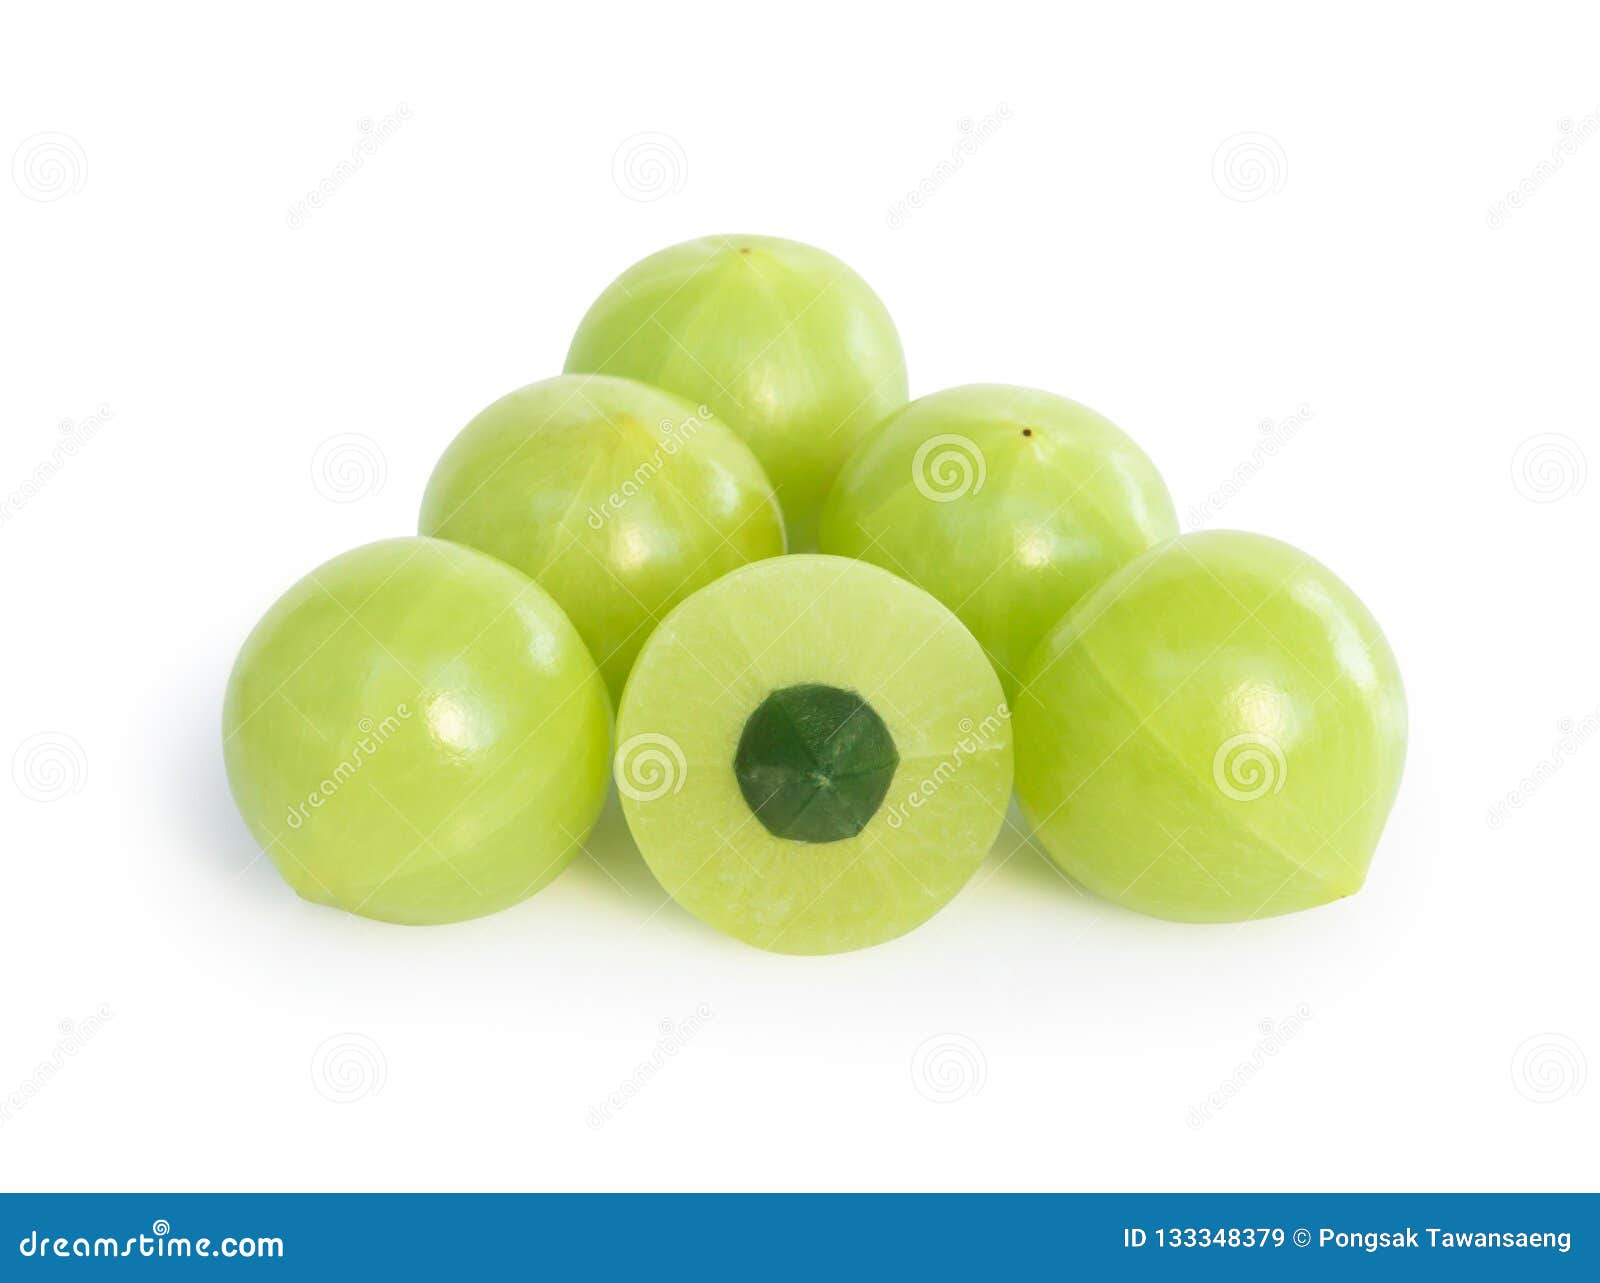 where can i find fresh indian gooseberry